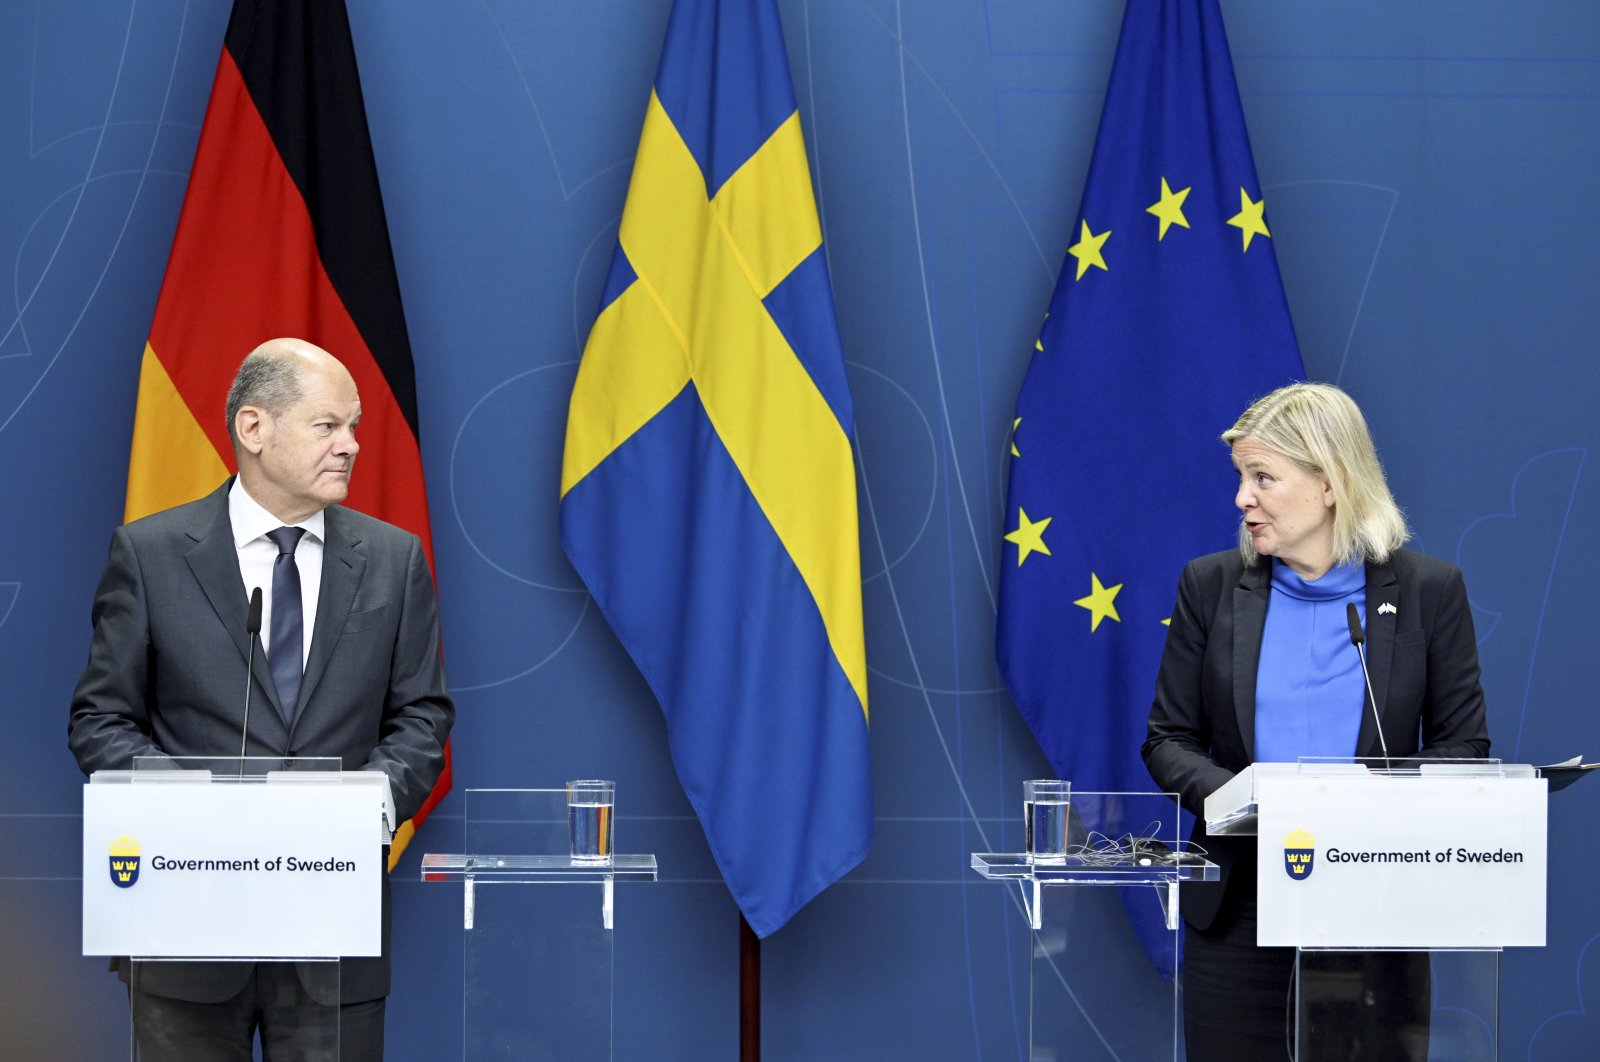 German Chancellor Olaf Scholz and Swedish Prime Minister Magdalena Andersson holds a joint news conference in Stockholm, Tuesday, Aug. 16, 2022. (Henrik Montgomery/TT News Agency via AP)